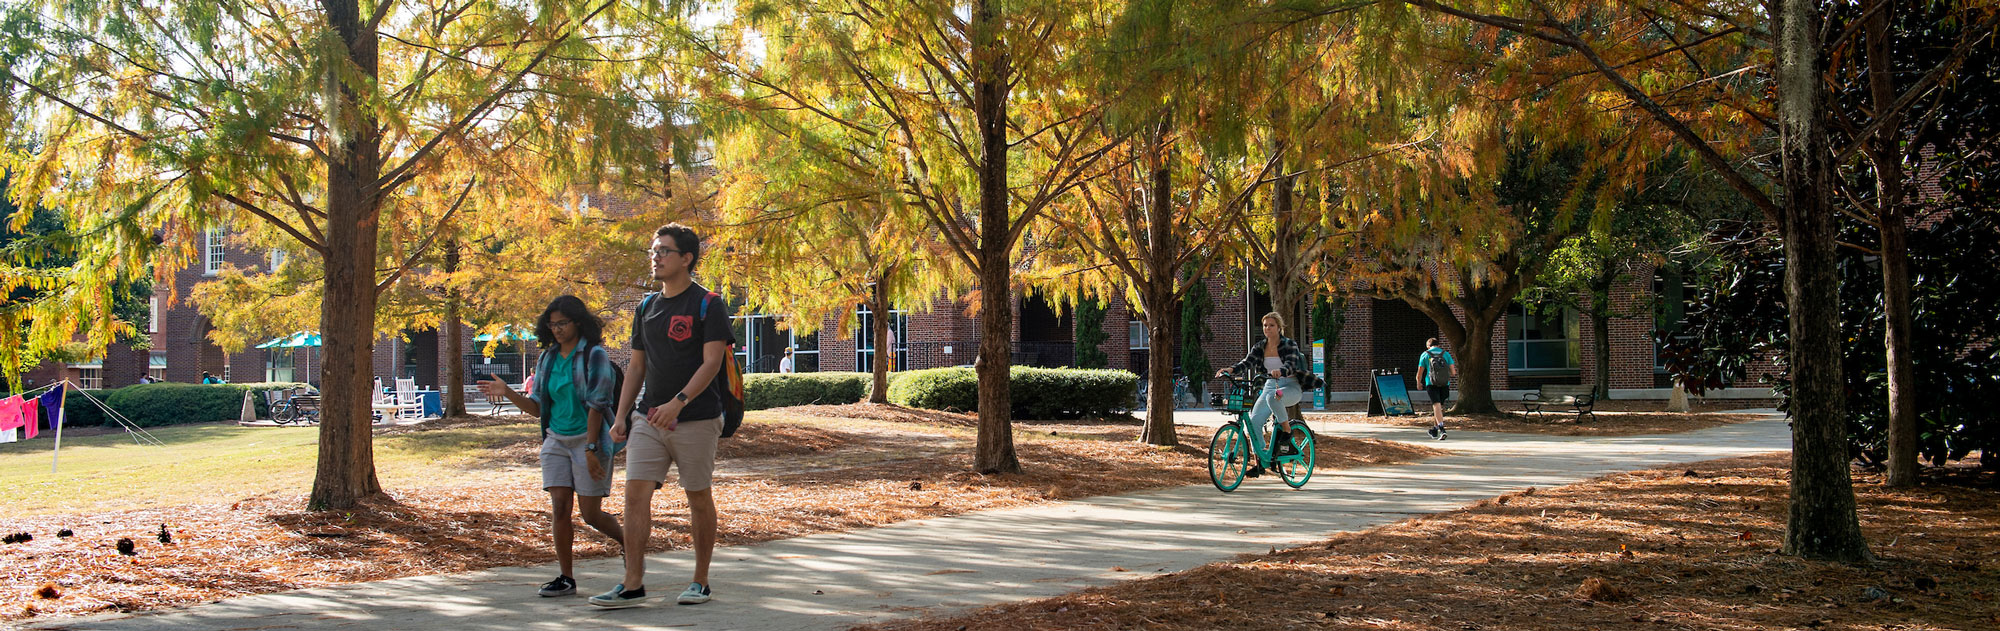 Students walking across campus during autumn